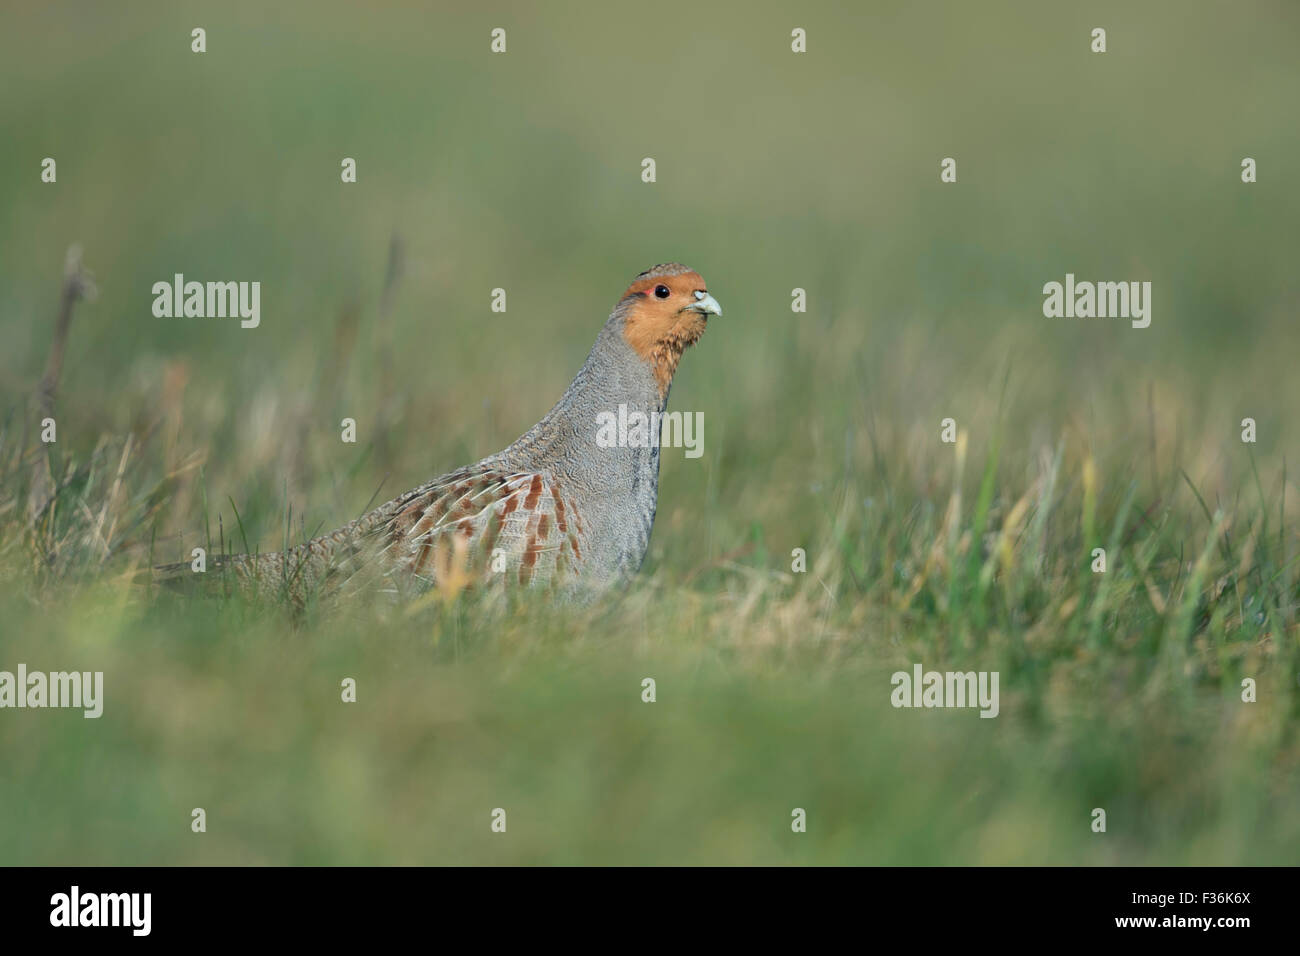 Attentive Grey partridge / Rebhuhn ( Perdix perdix ) looks with long neck out of a natural meadow, shows courtship display. Stock Photo